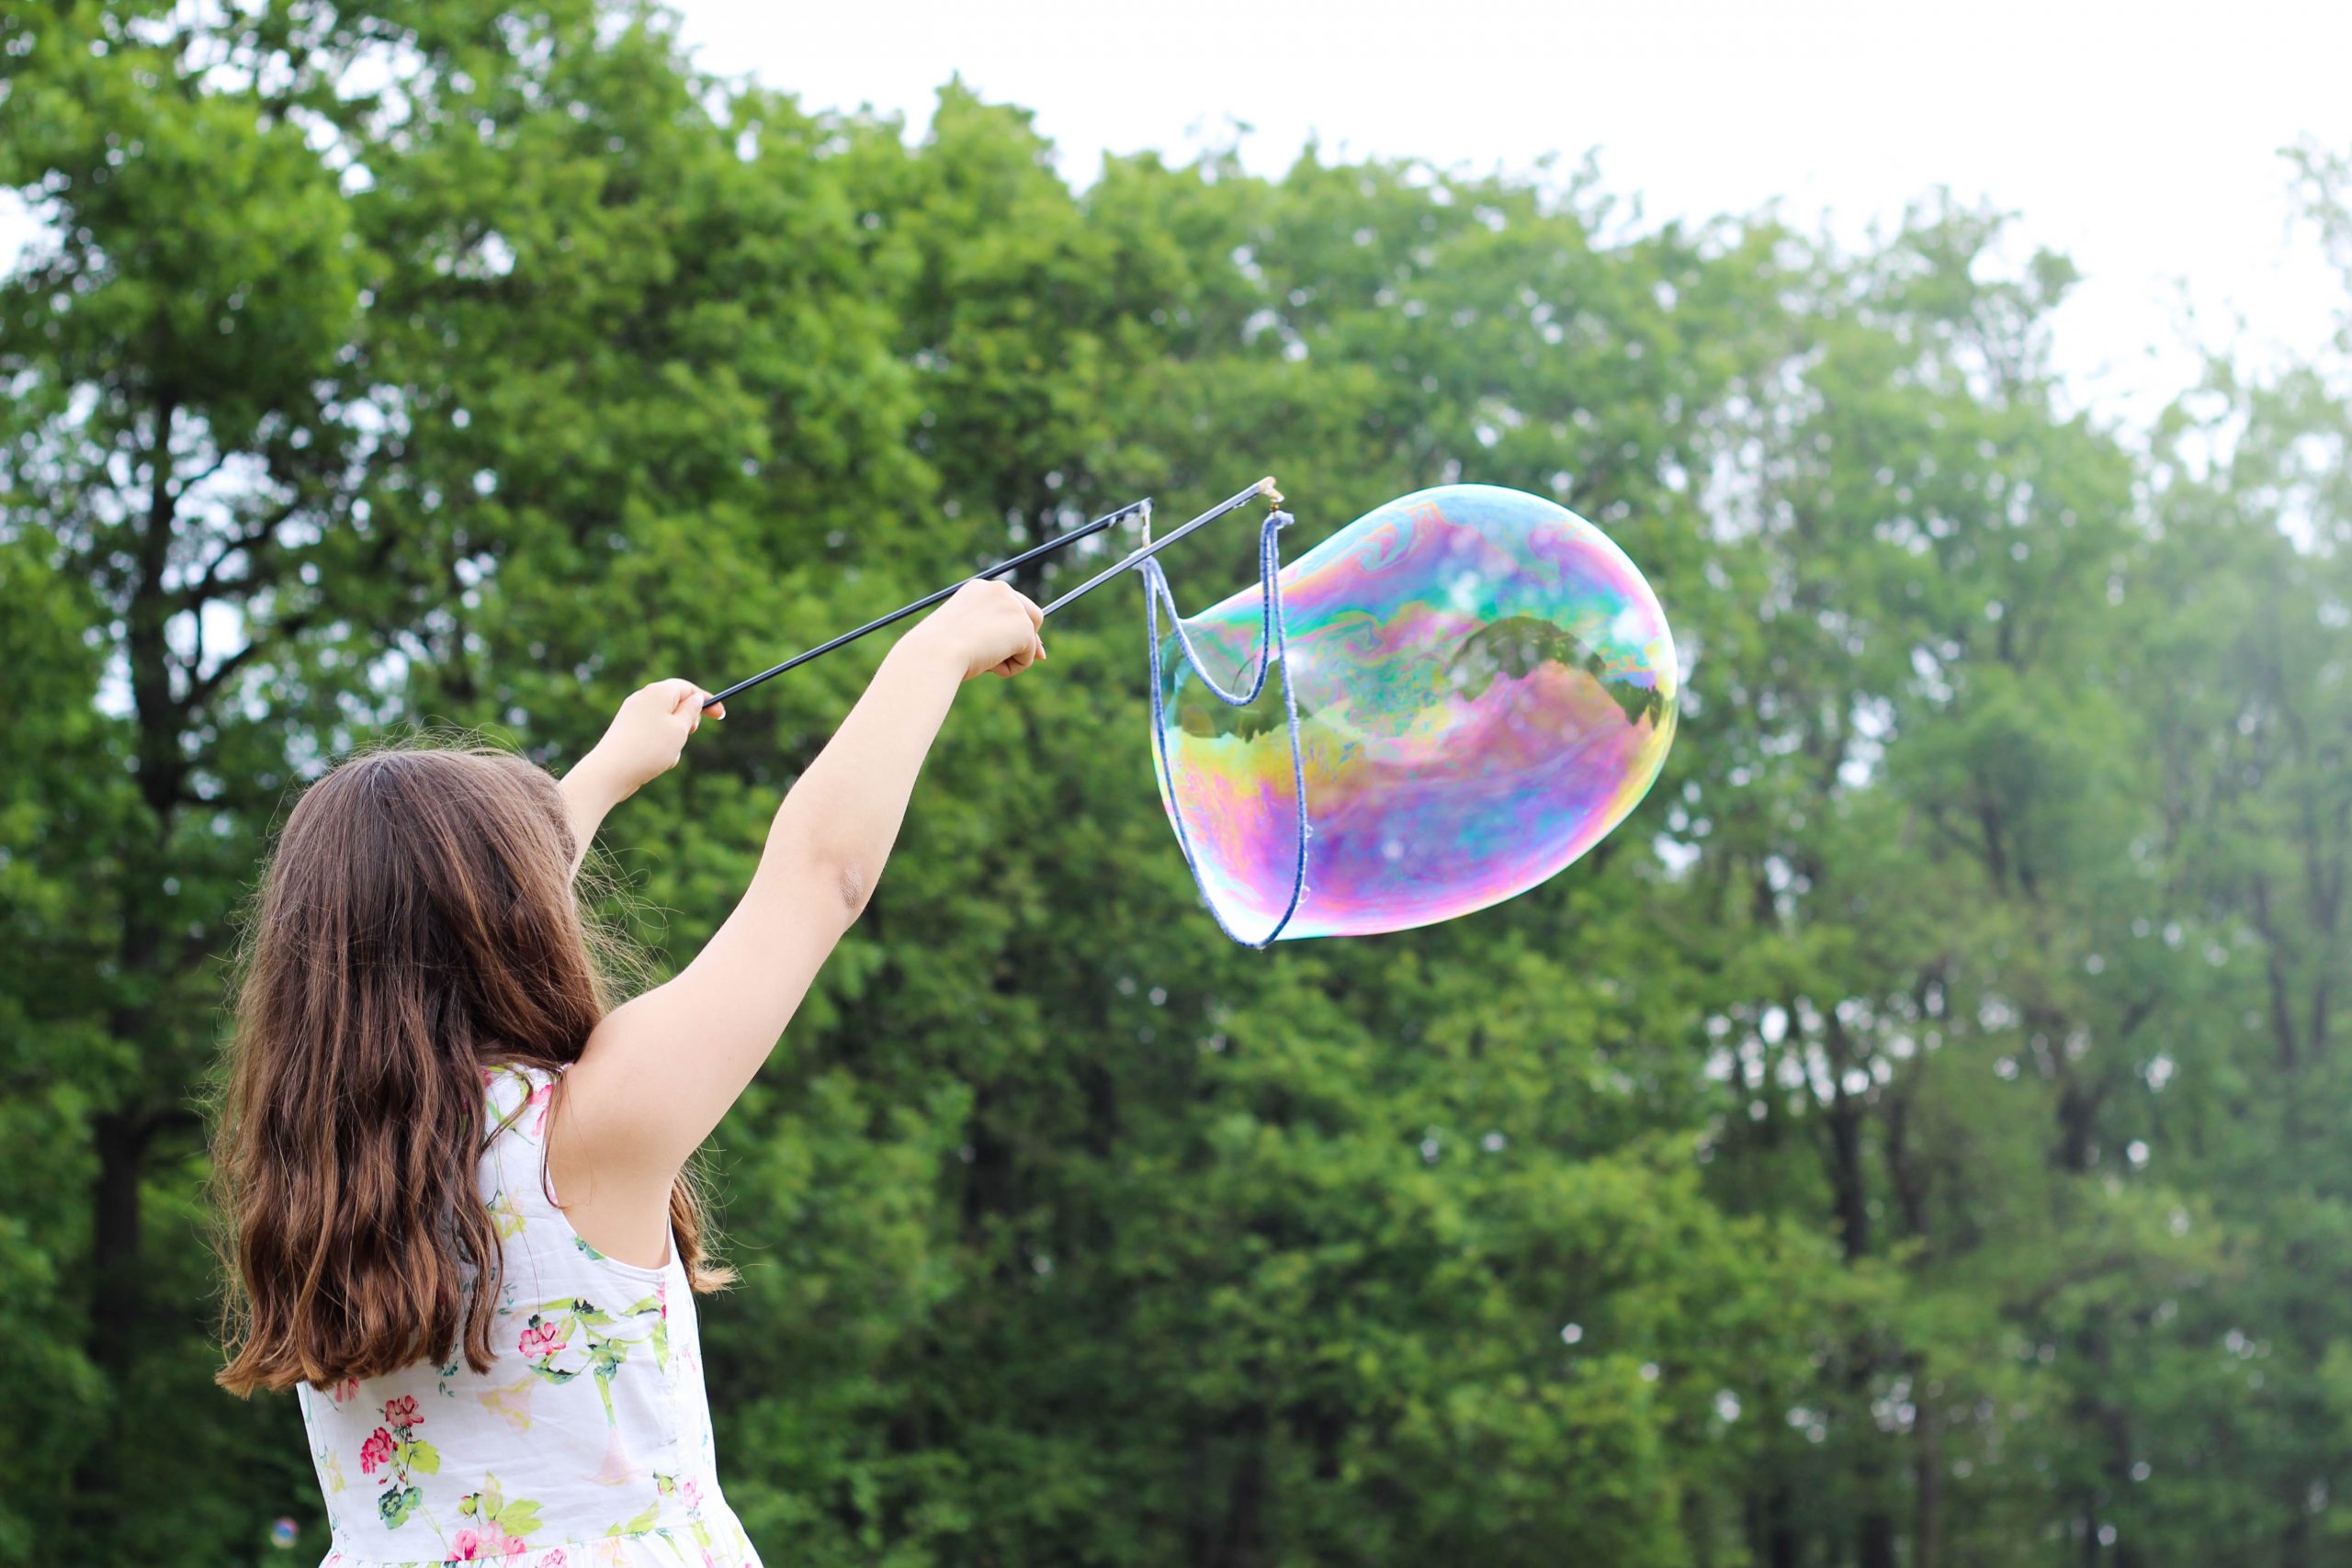 How to Make Homemade Bubbles - Simple and Fun Ideas